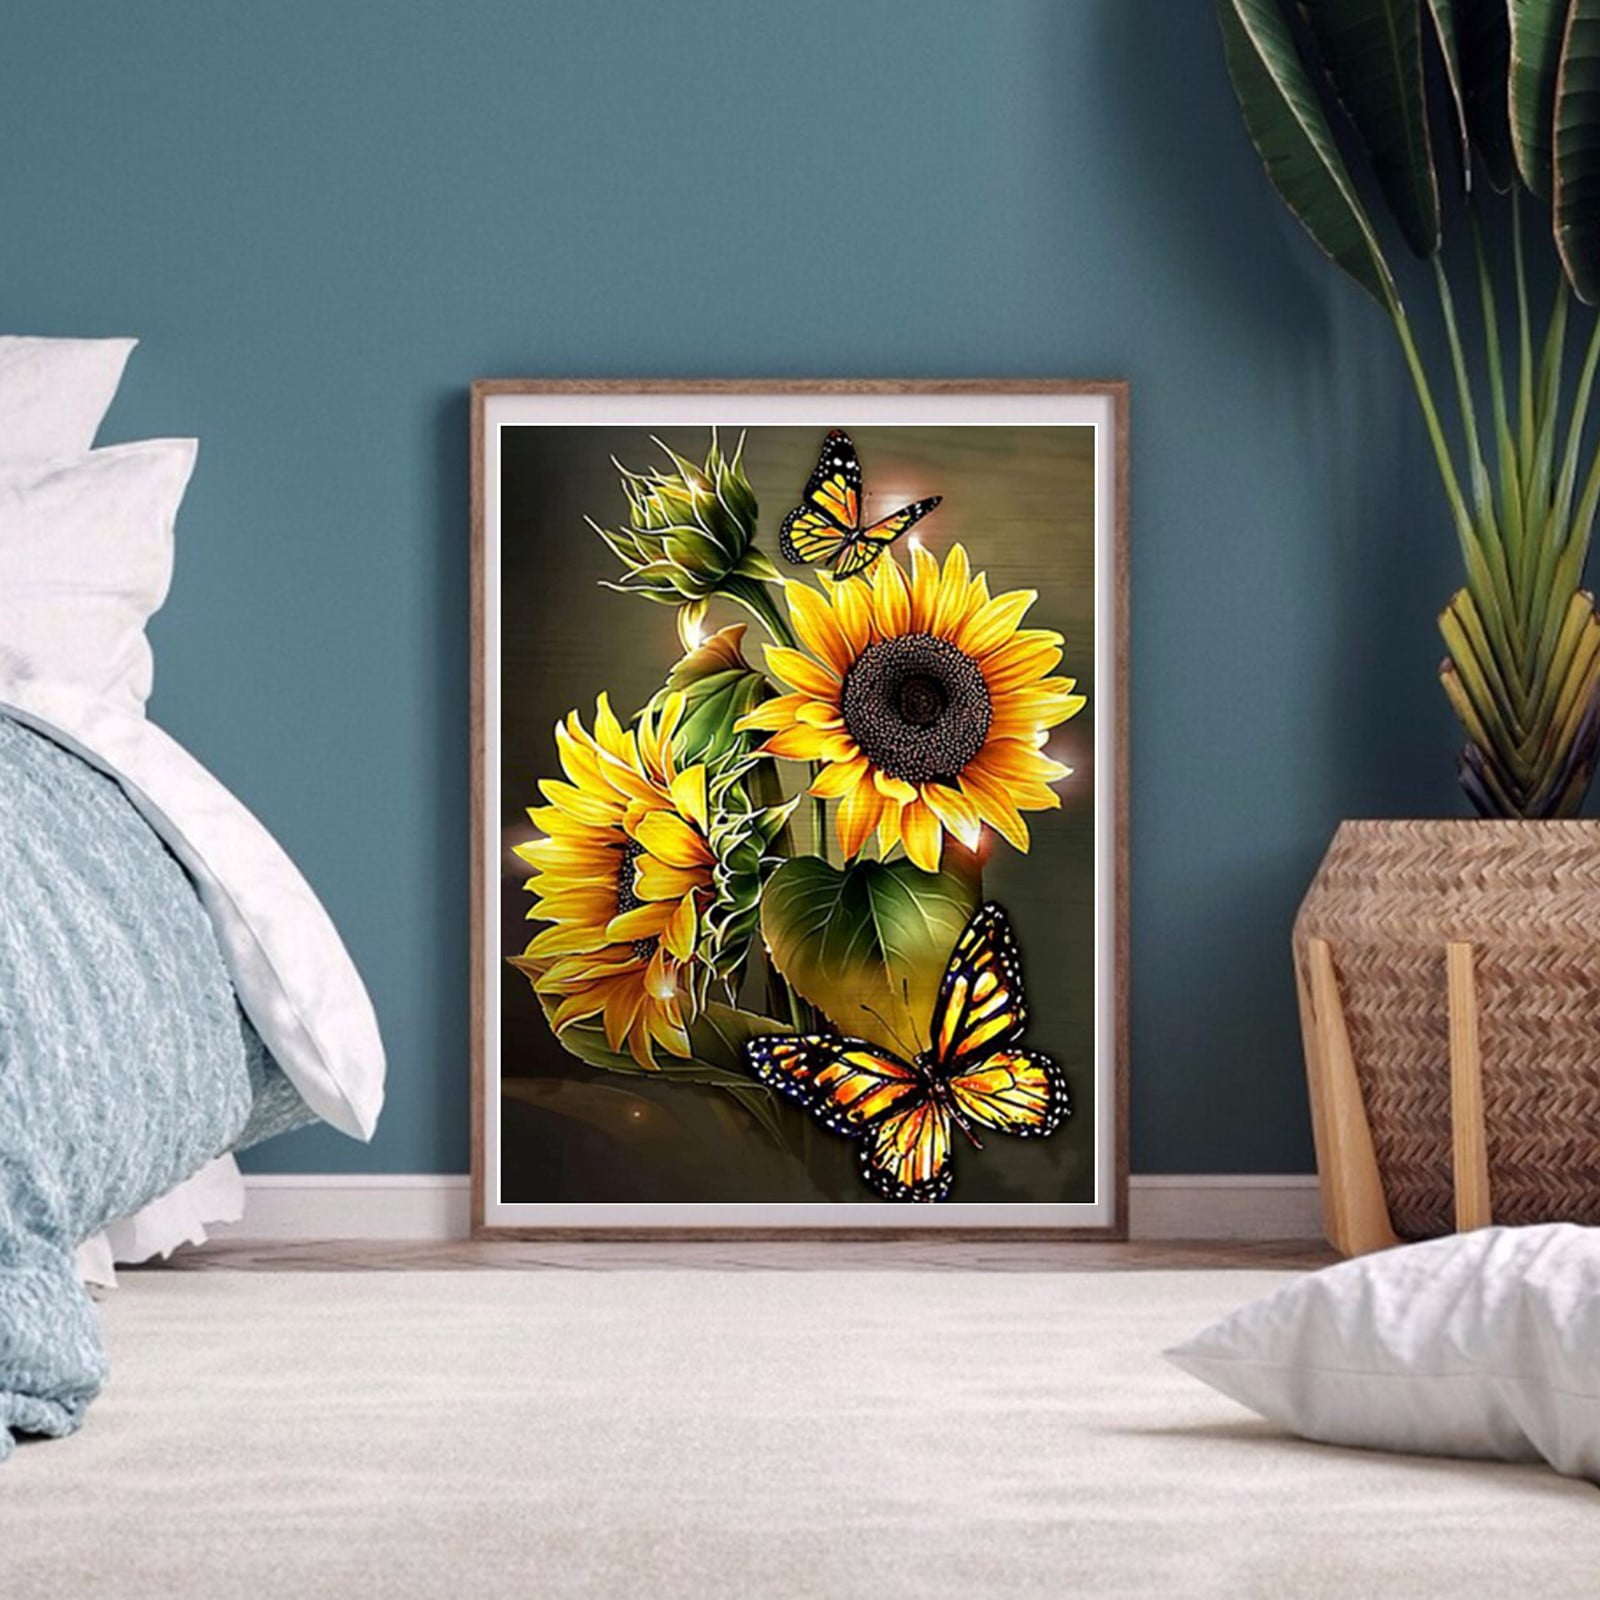 Sunflower Flower Sea and Butterfly 5D Diamond Painting -   – Five Diamond Painting